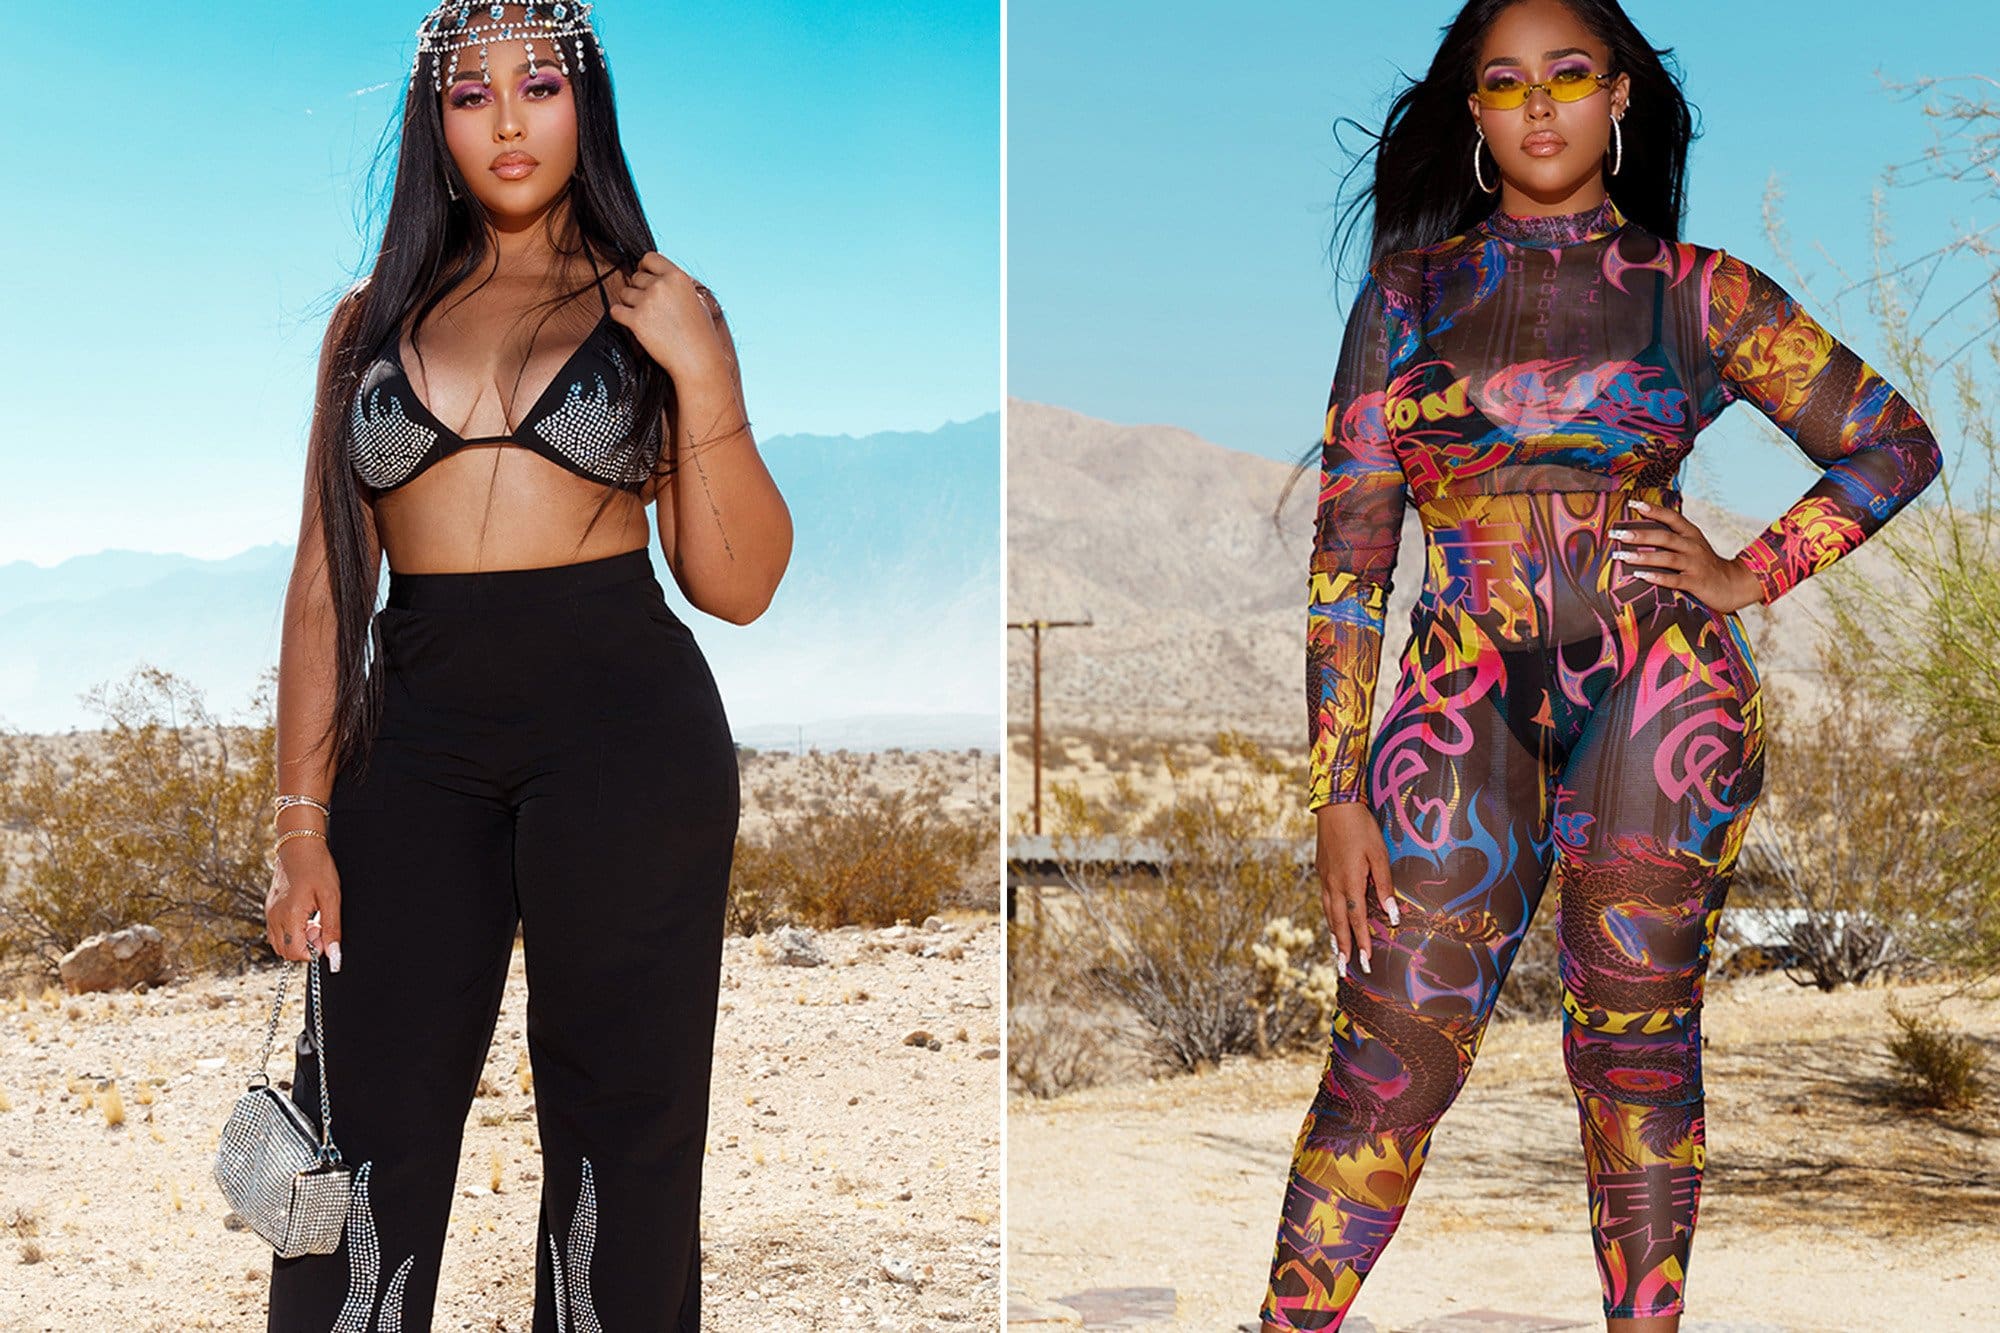 ”jordyn-woods-shows-off-her-curves-in-this-skin-tight-dress-check-out-the-jaw-dropping-pics”